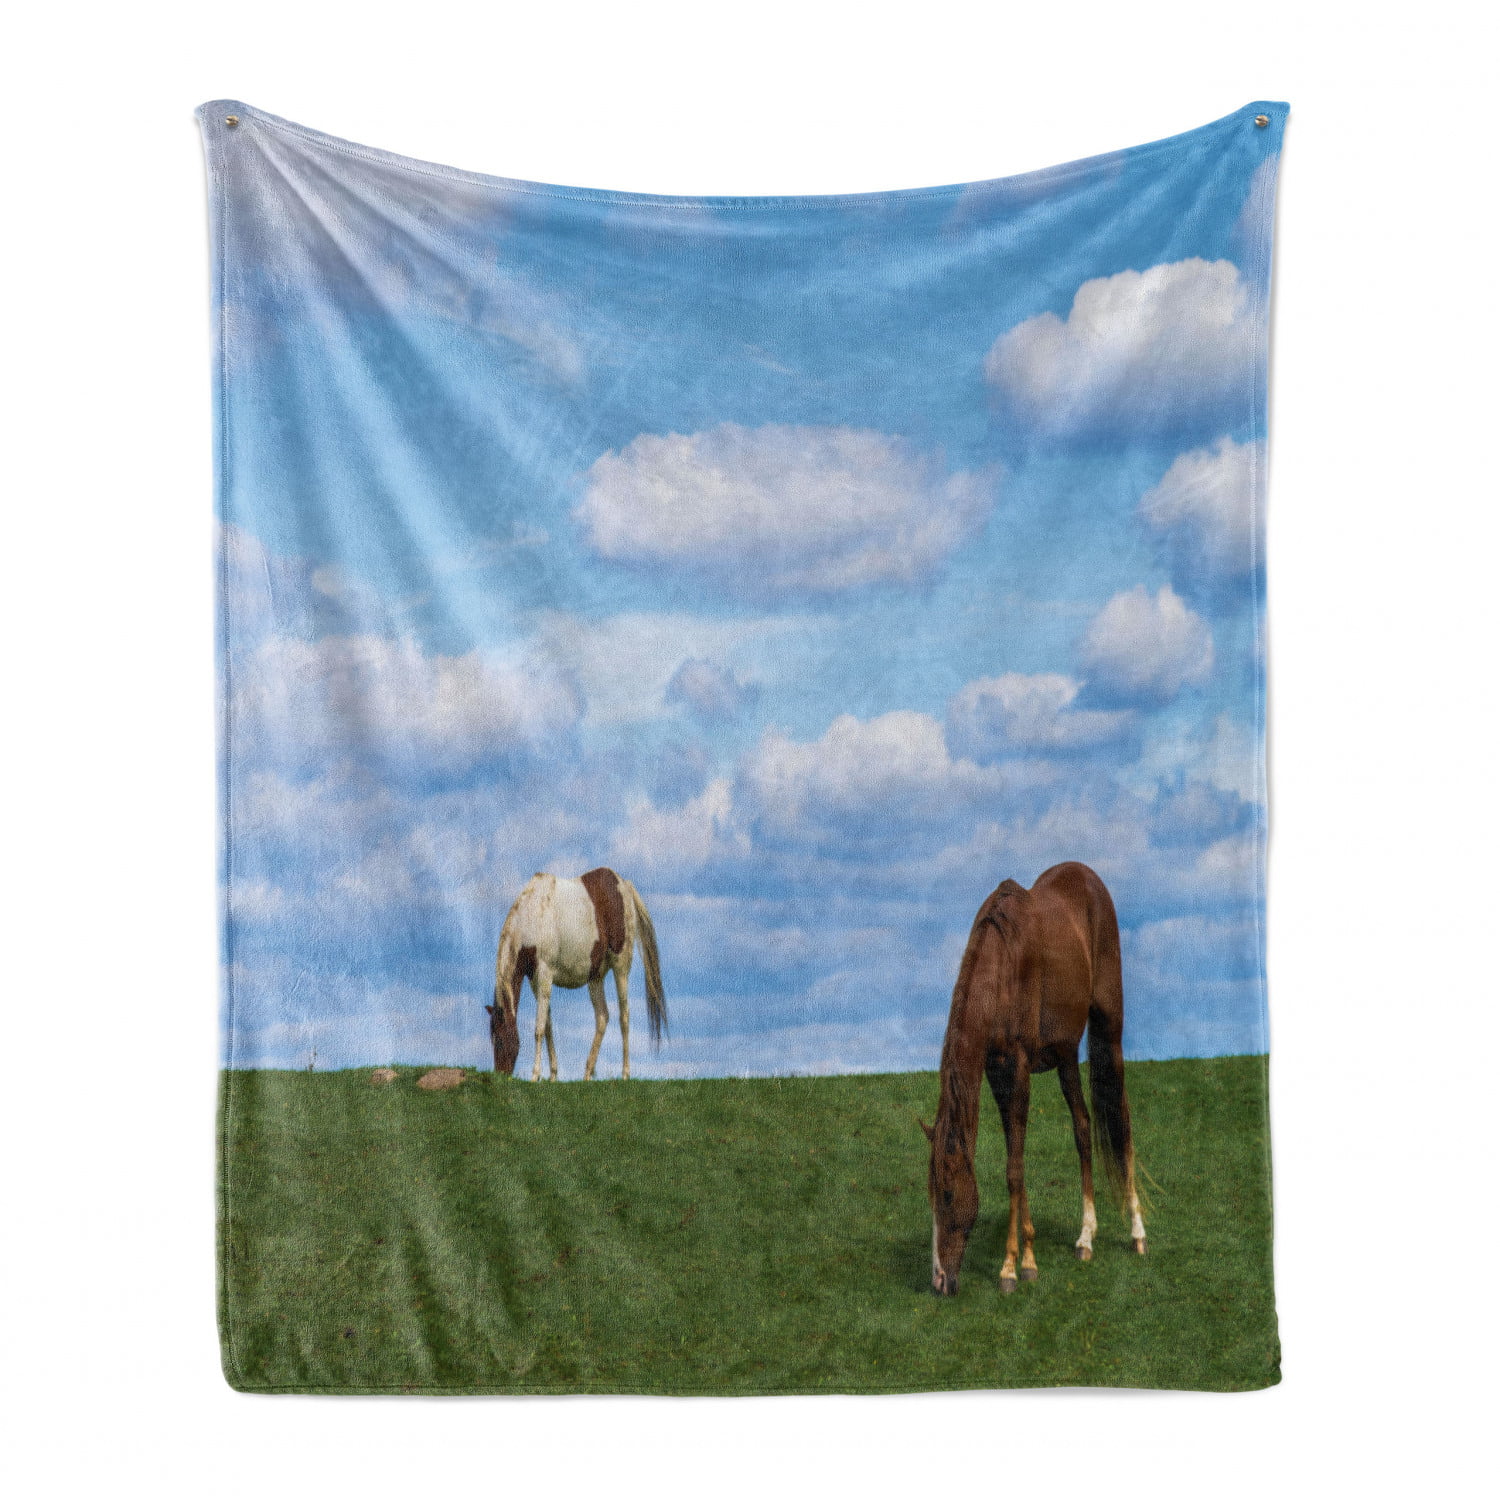 Multicolor Ambesonne Minnesota Soft Flannel Fleece Throw Blanket 2 Horses Grazing on a Green Meadow on Top of Rural Minnesota Hills Image Print 50 x 70 Cozy Plush for Indoor and Outdoor Use